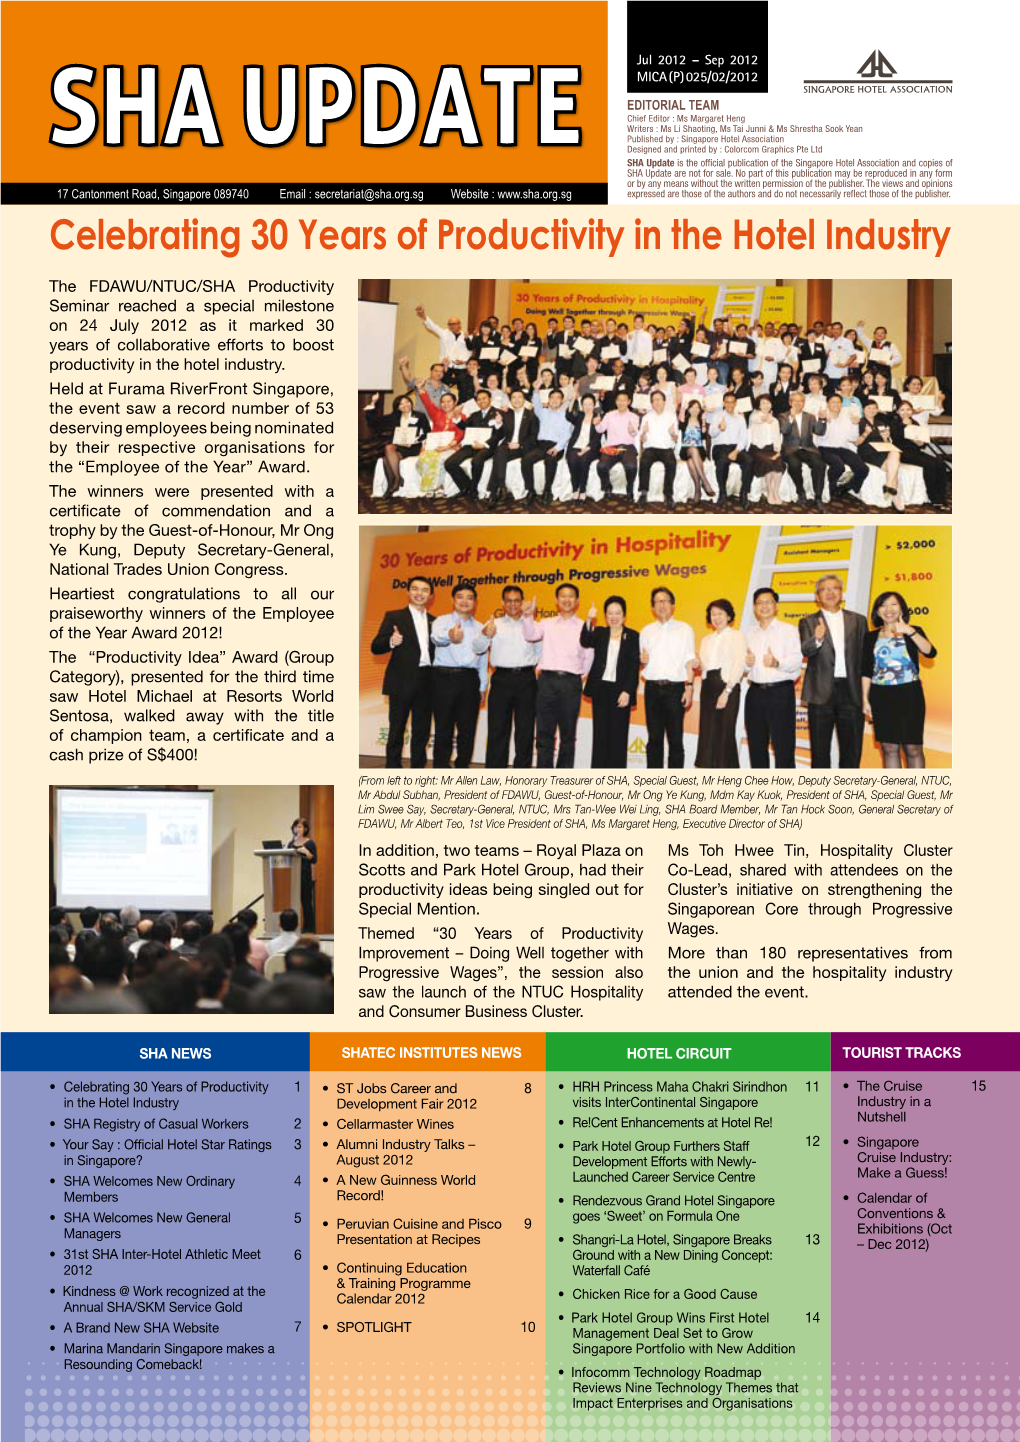 SHA Update SHA Update Is the Official Publication of the Singapore Hotel Association and Copies of SHA Update Are Not for Sale